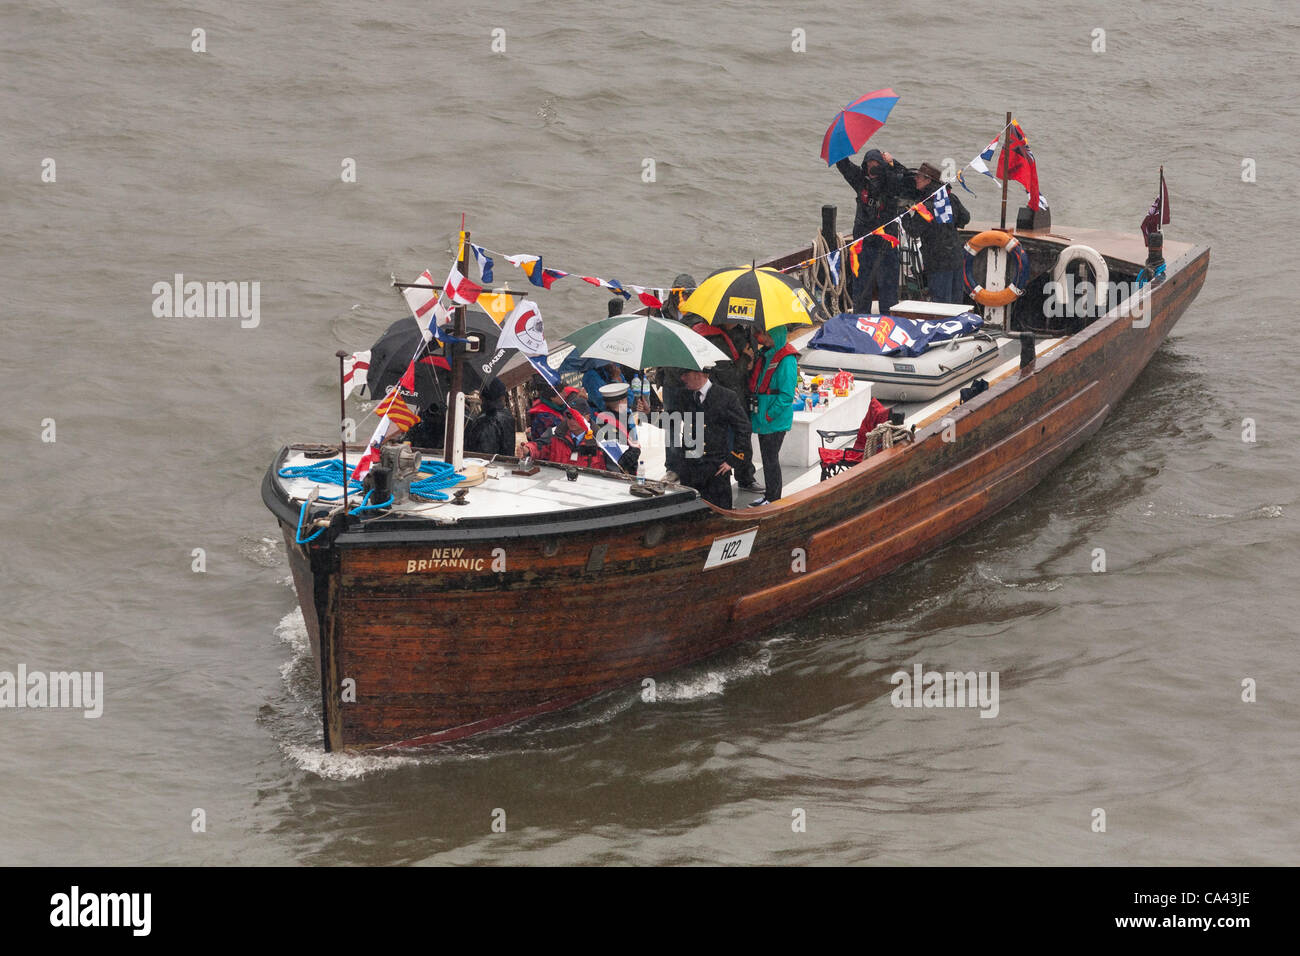 The New Britannic, a Dunkirk Little Ship proceeds along River Thames, as part of the Queen’s Thames Diamond Jubilee Pageant, taken from Tower Bridge, London, UK, 3rd June 2012. The Diamond Jubilee celebrates Queen Elizabeth the second’s 60 years as Head of the Commonwealth. Stock Photo